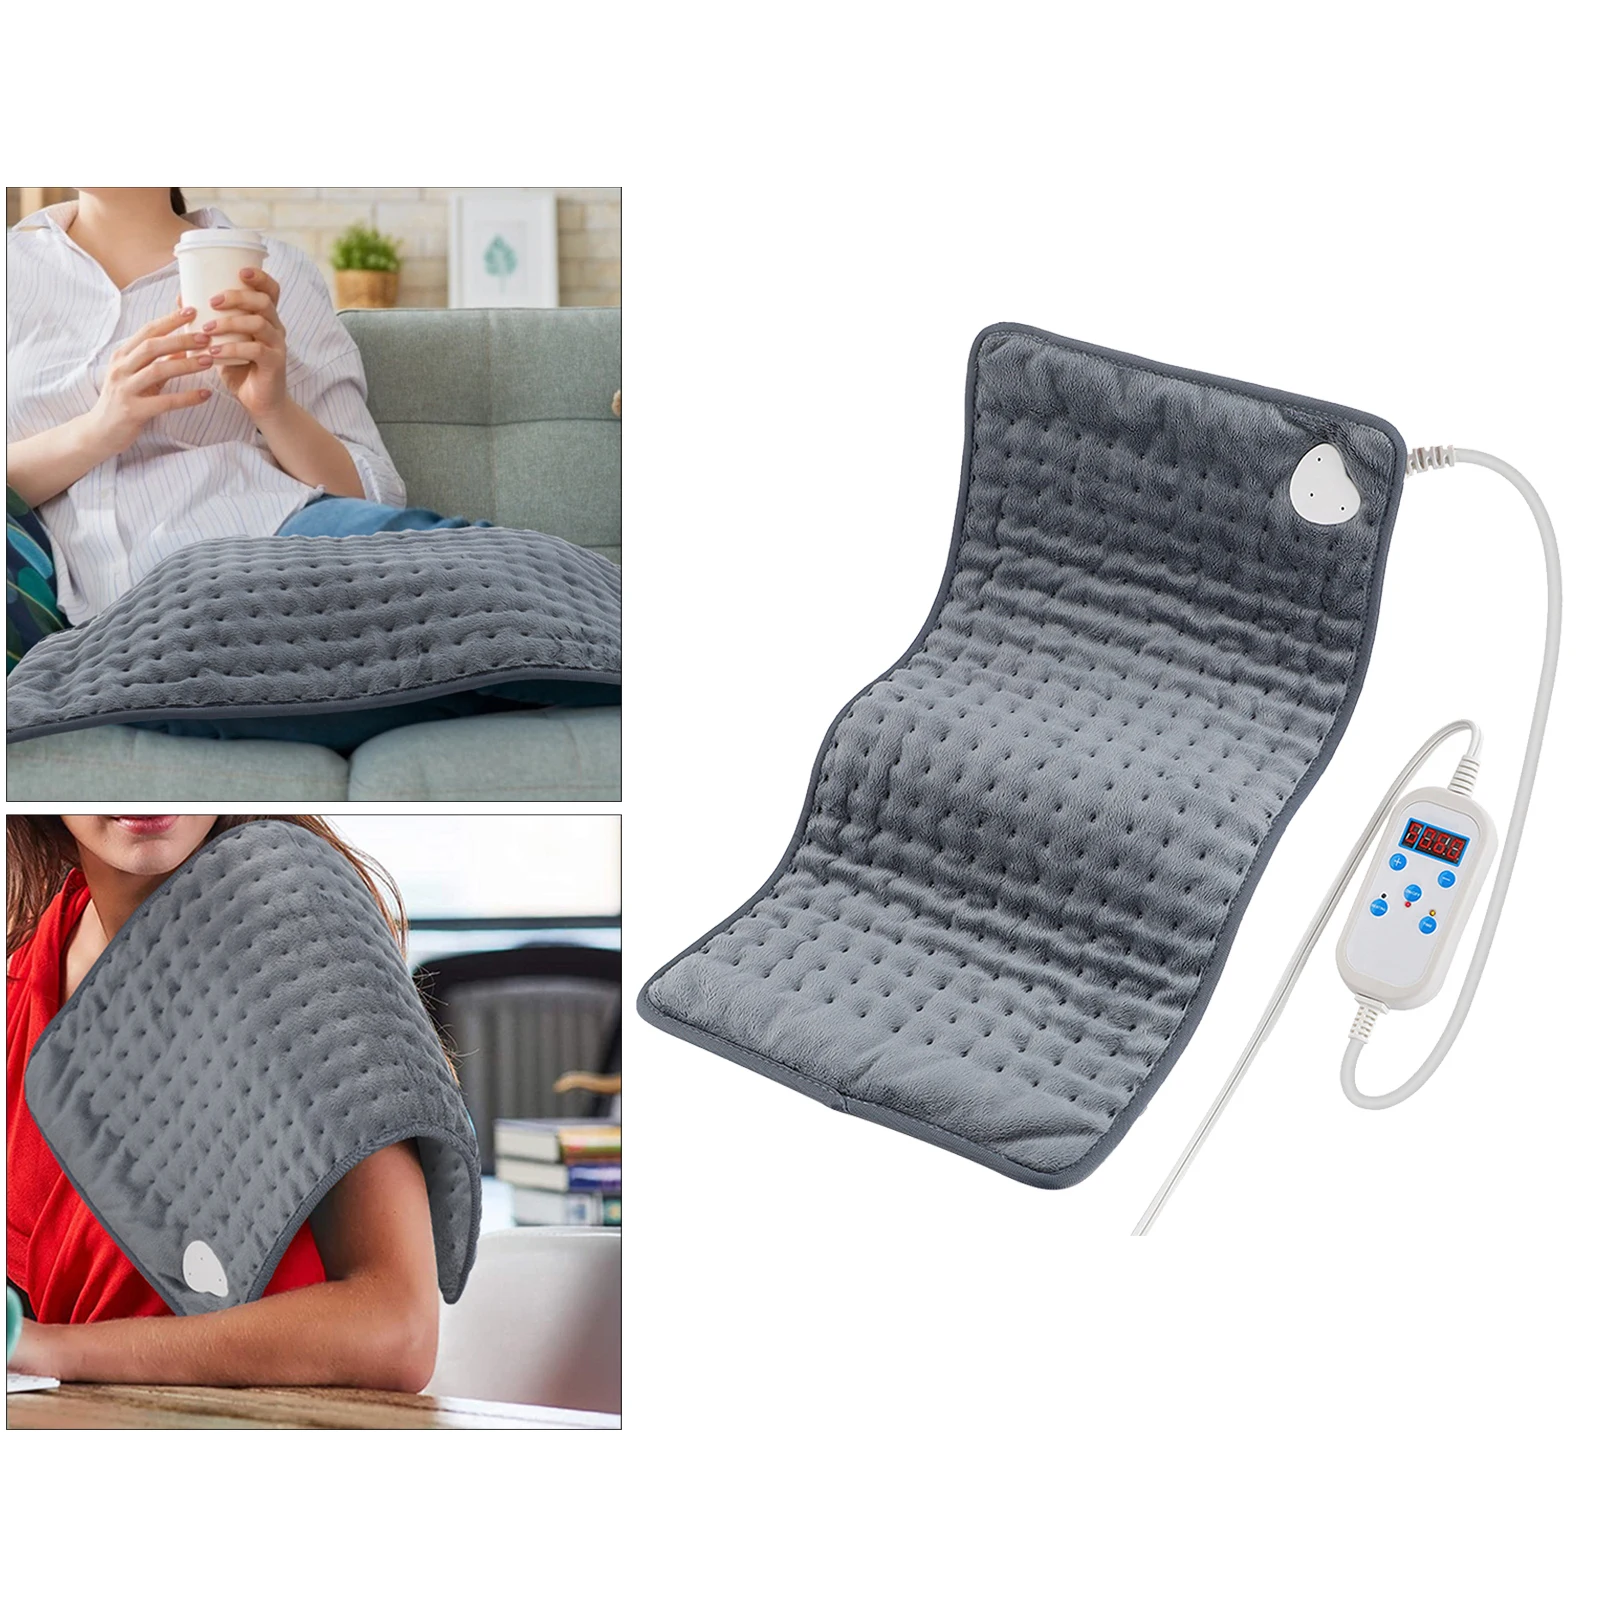 

Soft Flannel Electric Heating Pad for Whole Body Stomach Arms Back Shoulders Relieving Pain Muscle Relief Relaxation Quick